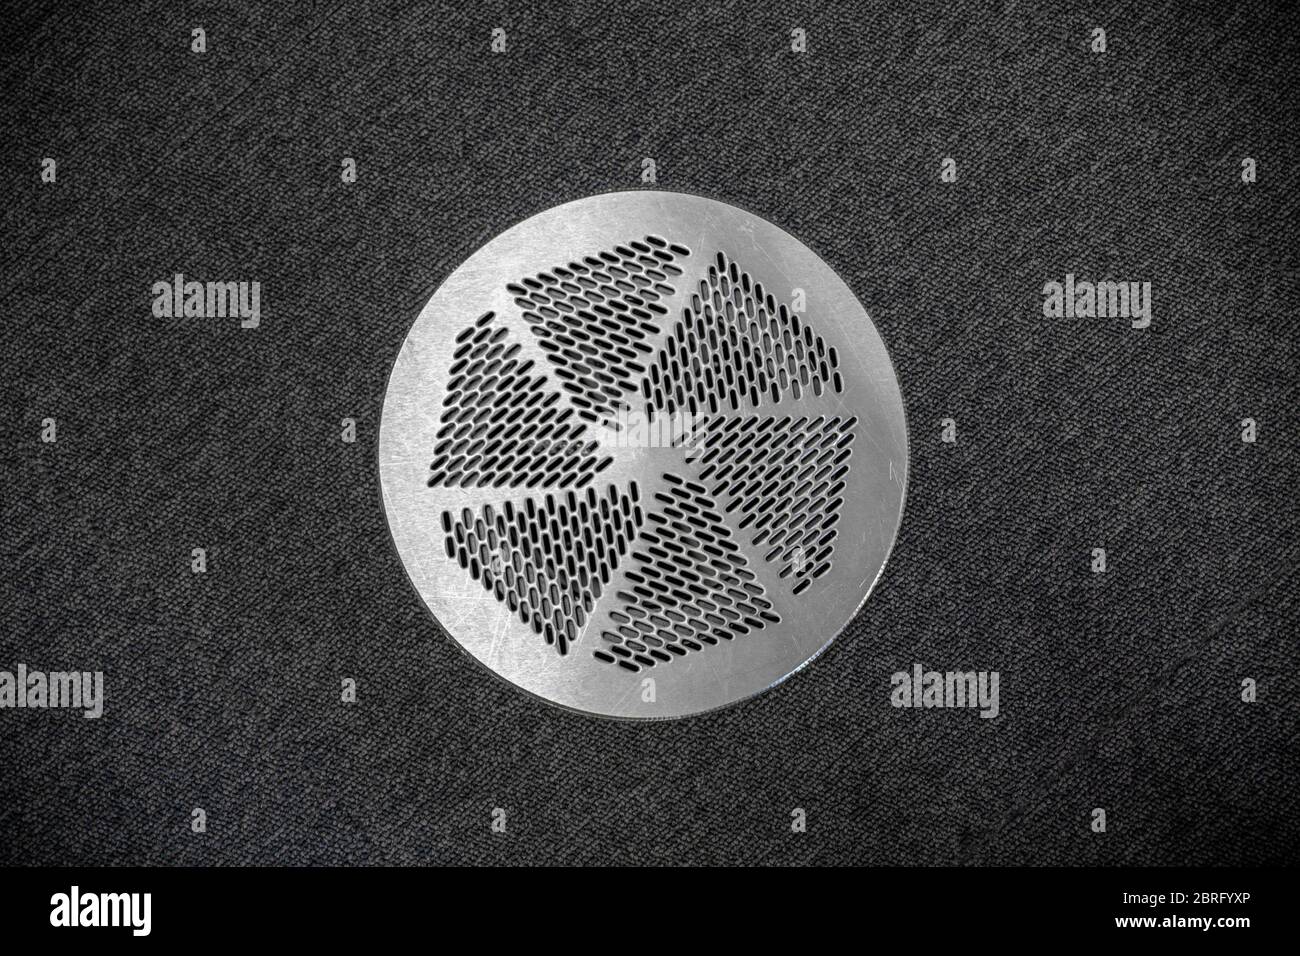 Close Up of Circular Metal Air Vent in Home Surrounded by Dark Grey Carpet Floor in a Office Building. Stock Photo